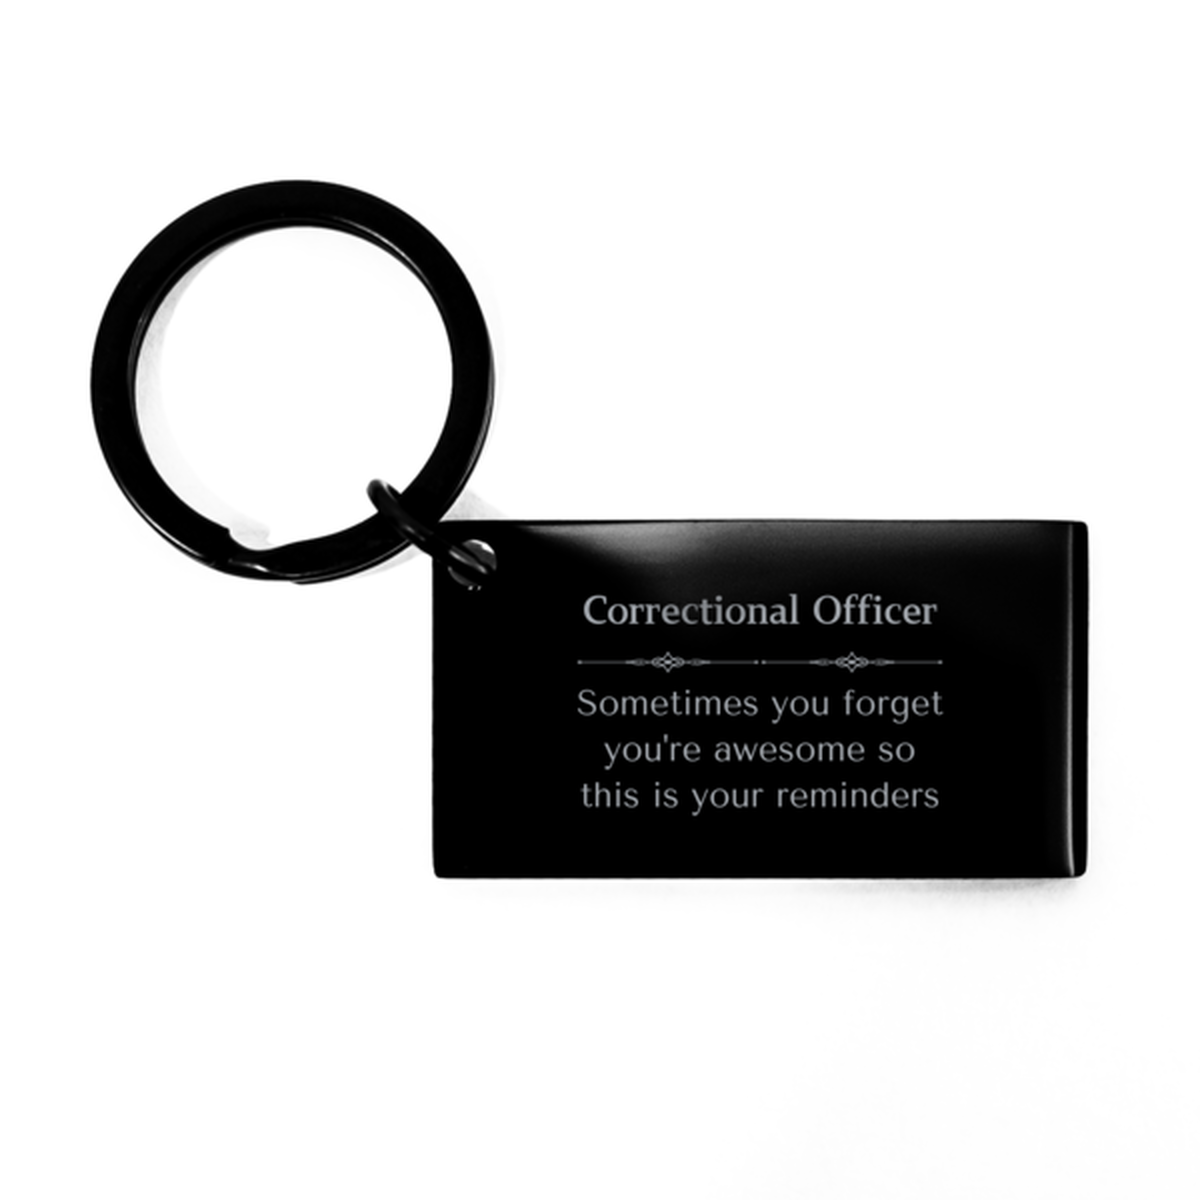 Sentimental Correctional Officer Keychain, Fabricator Sometimes you forget you're awesome so this is your reminders, Graduation Christmas Birthday Gifts for Correctional Officer, Men, Women, Coworkers